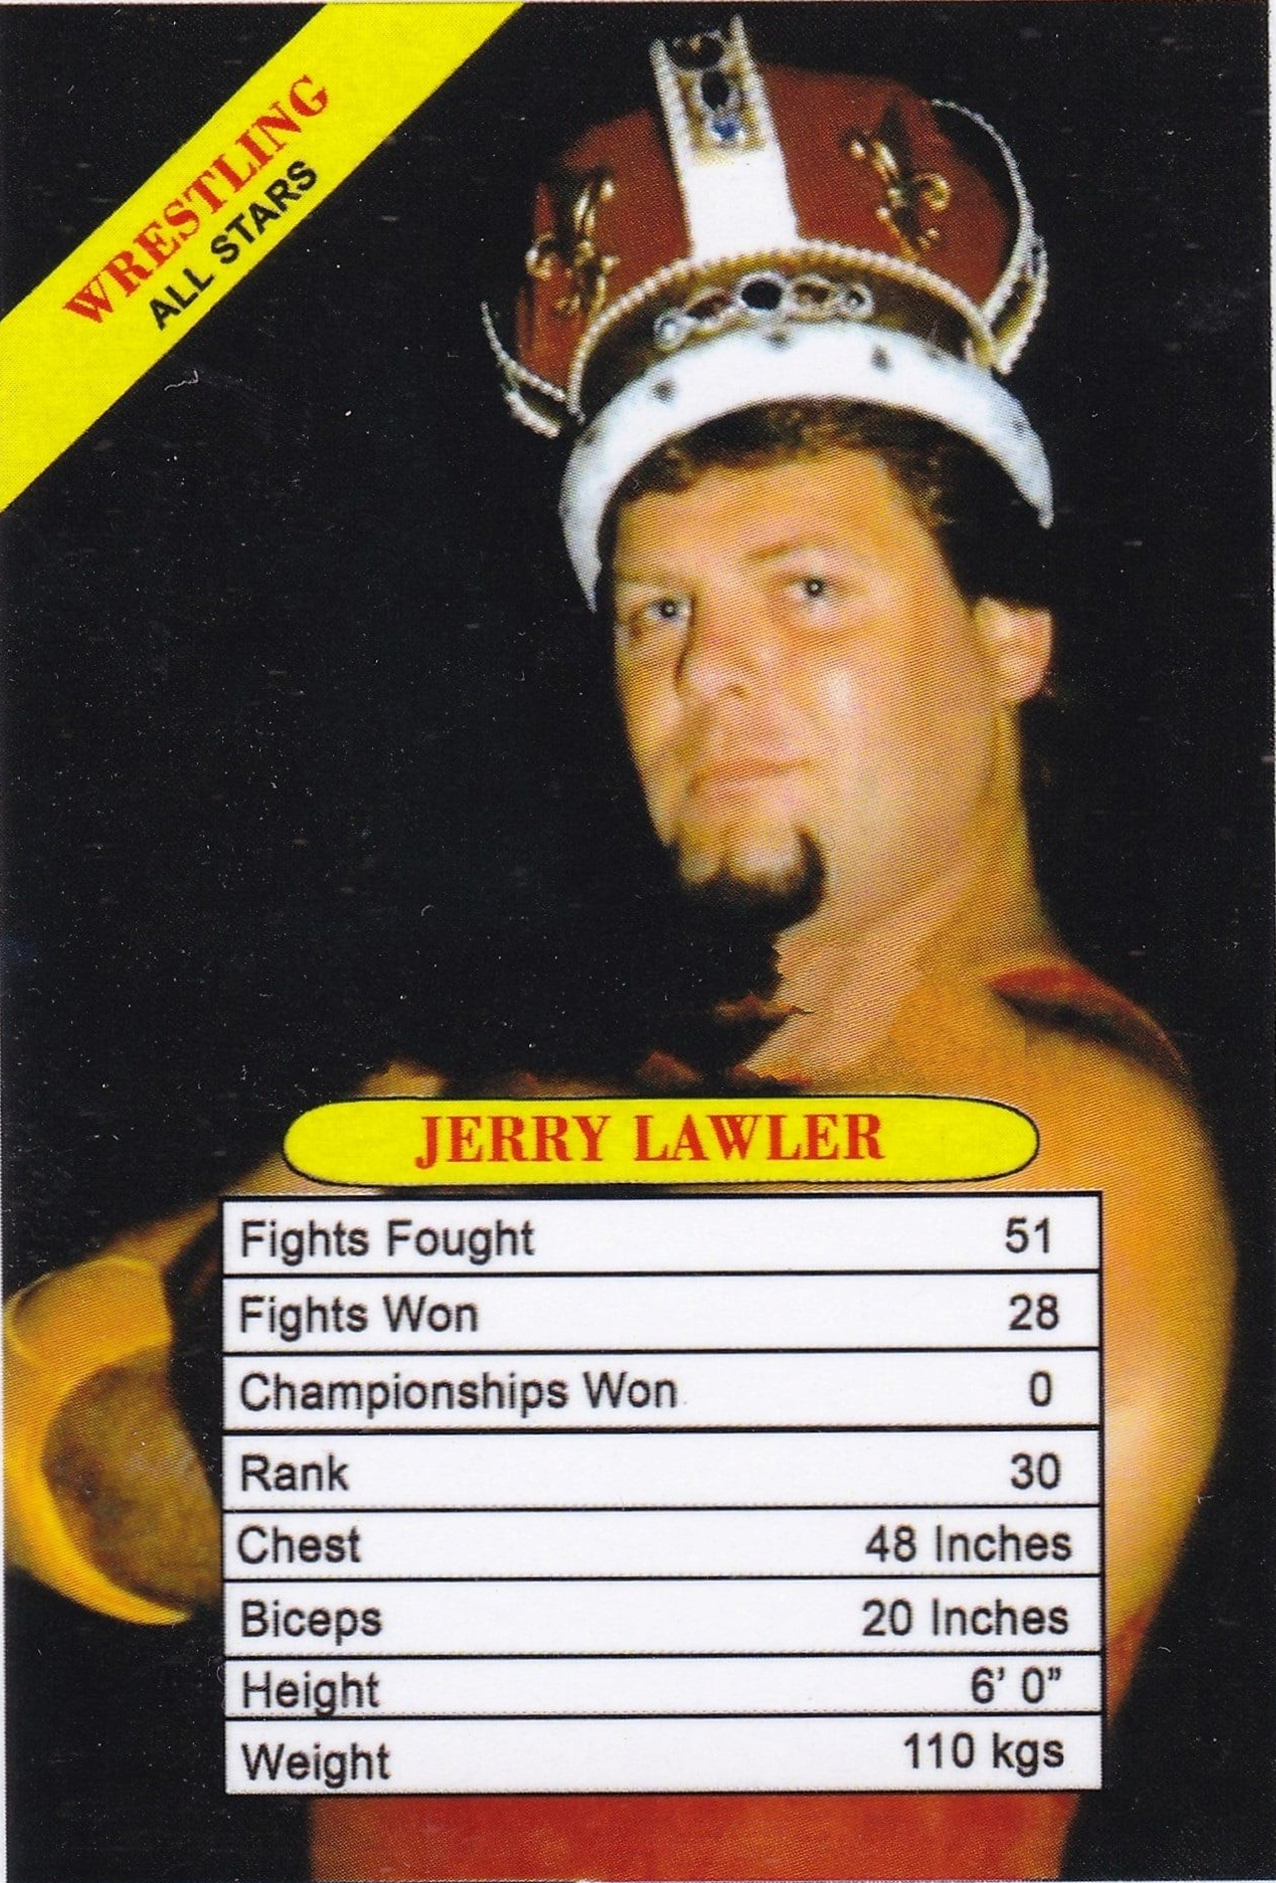 1993 WWF Universal Trump Cards (India) Jerry Lawler